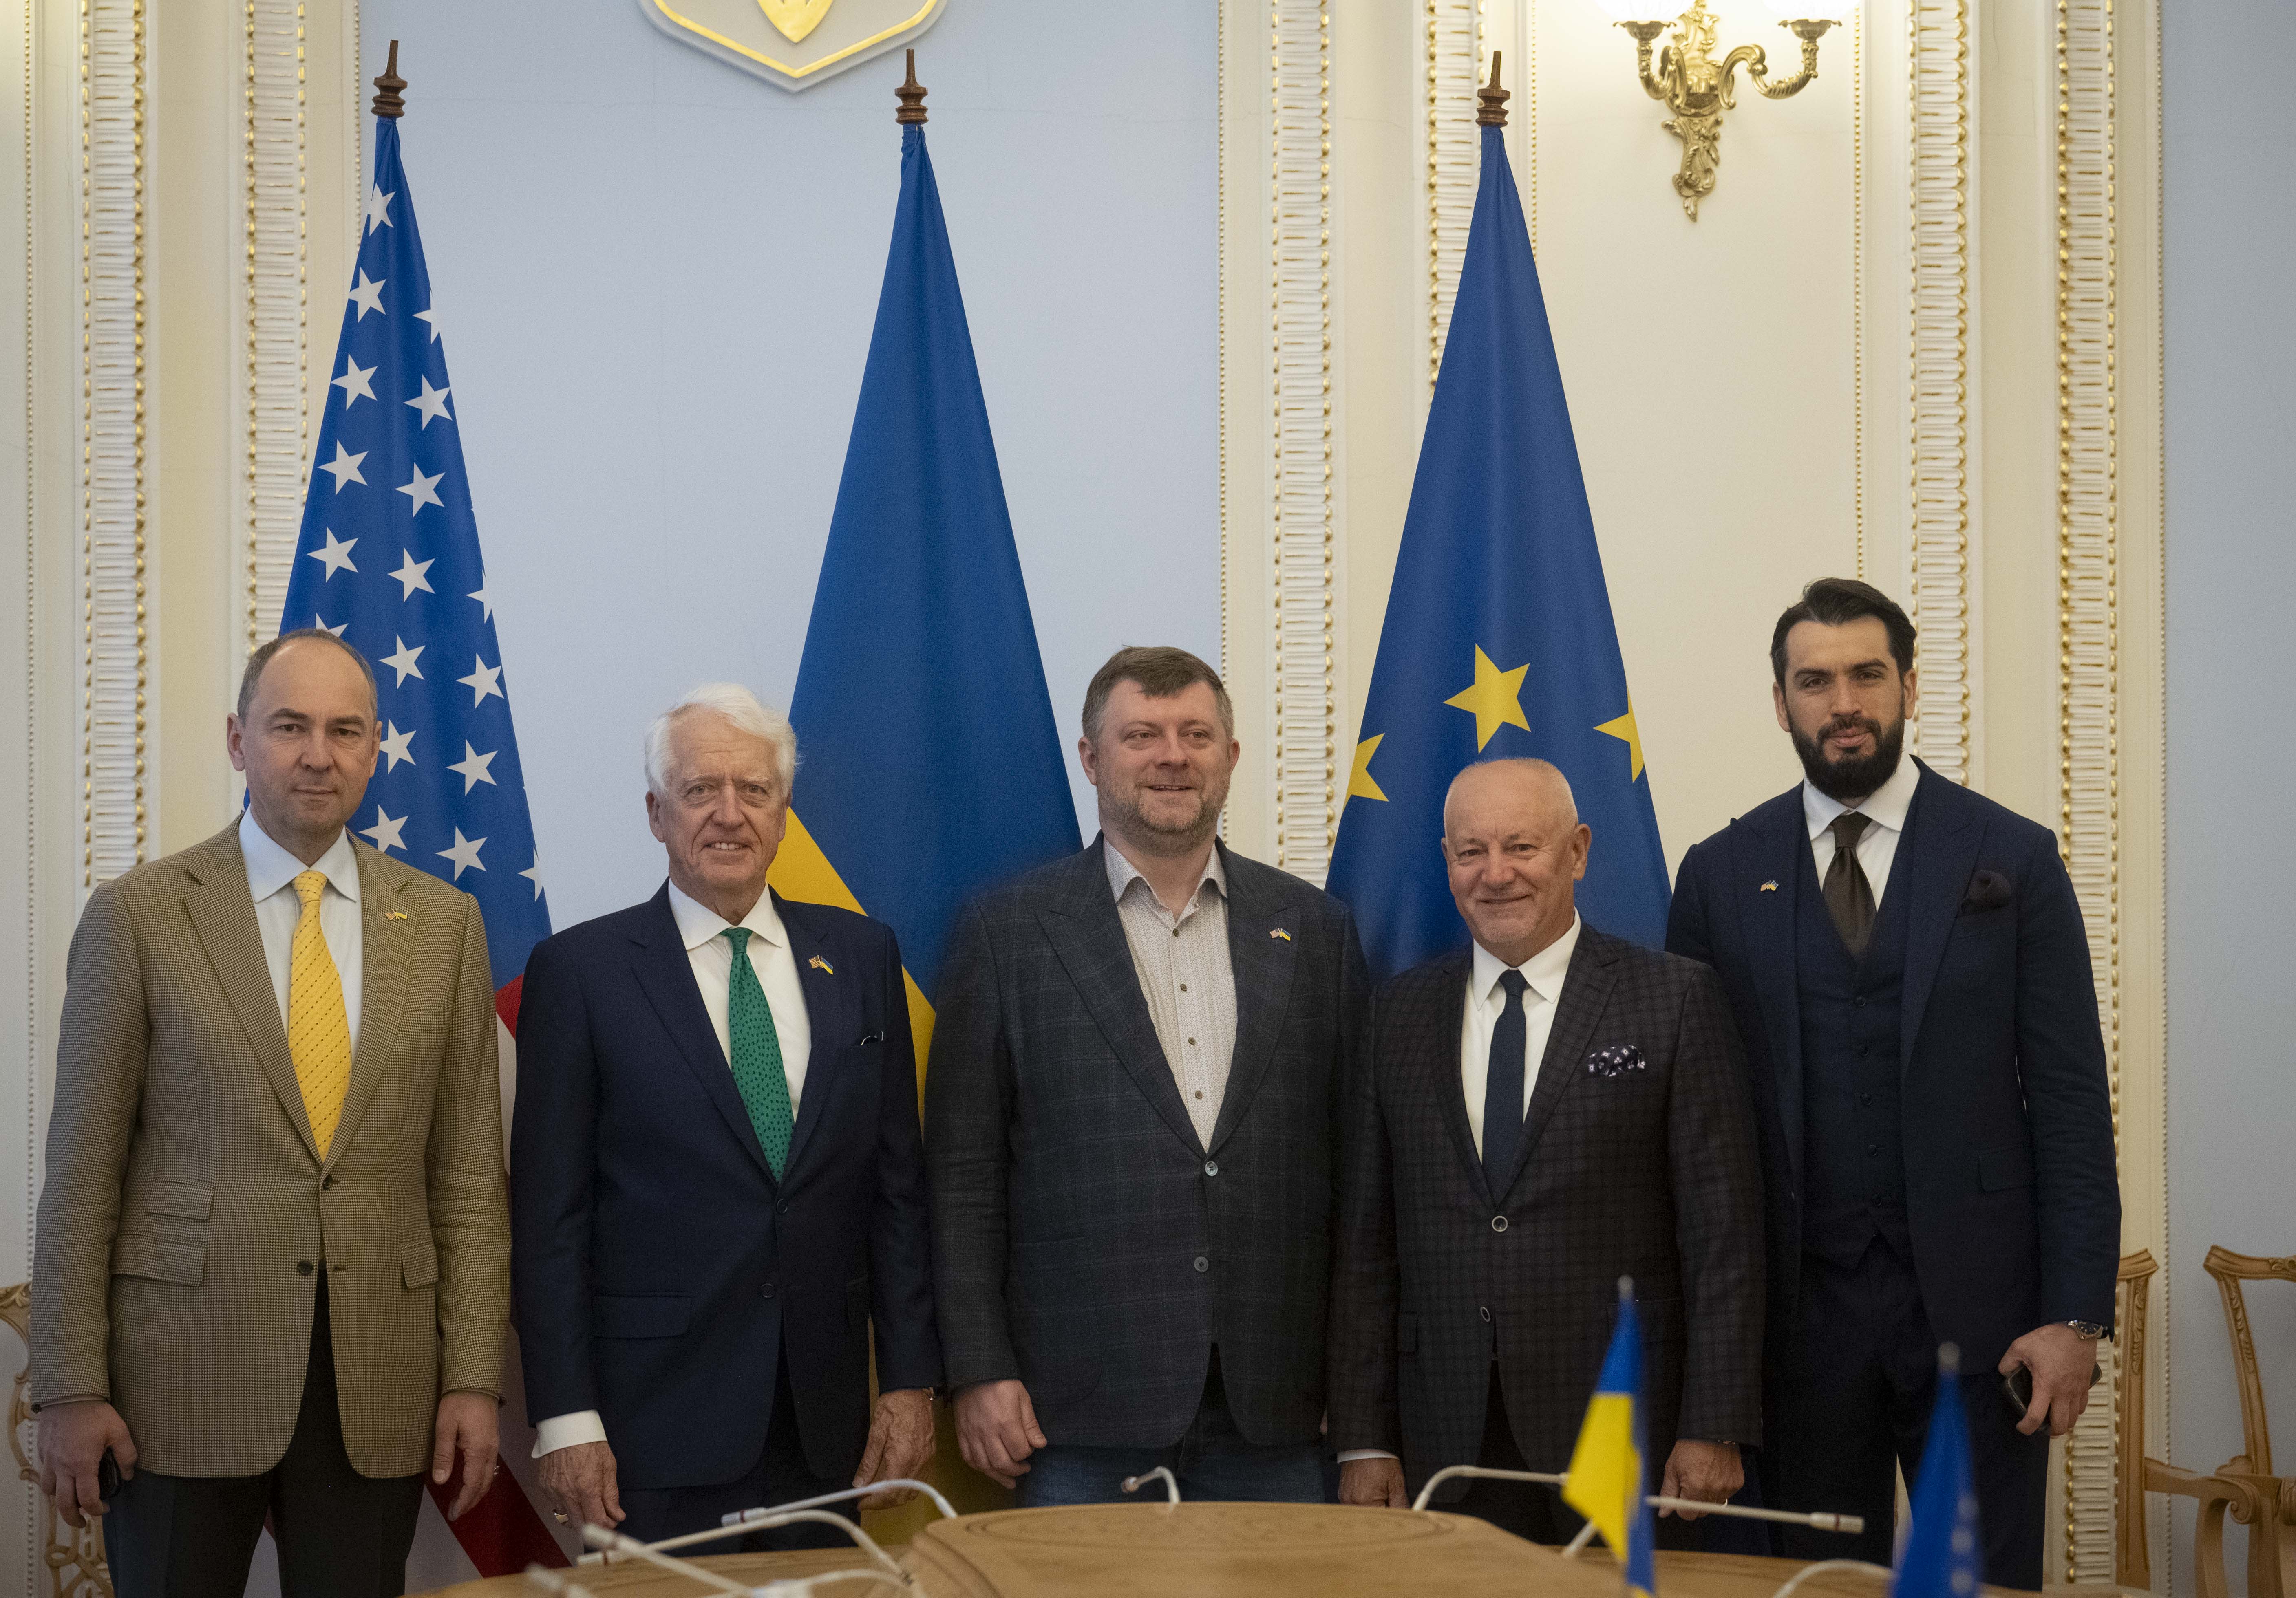 Oleg Malinevskiy joined the delegation of American politicians and public figures